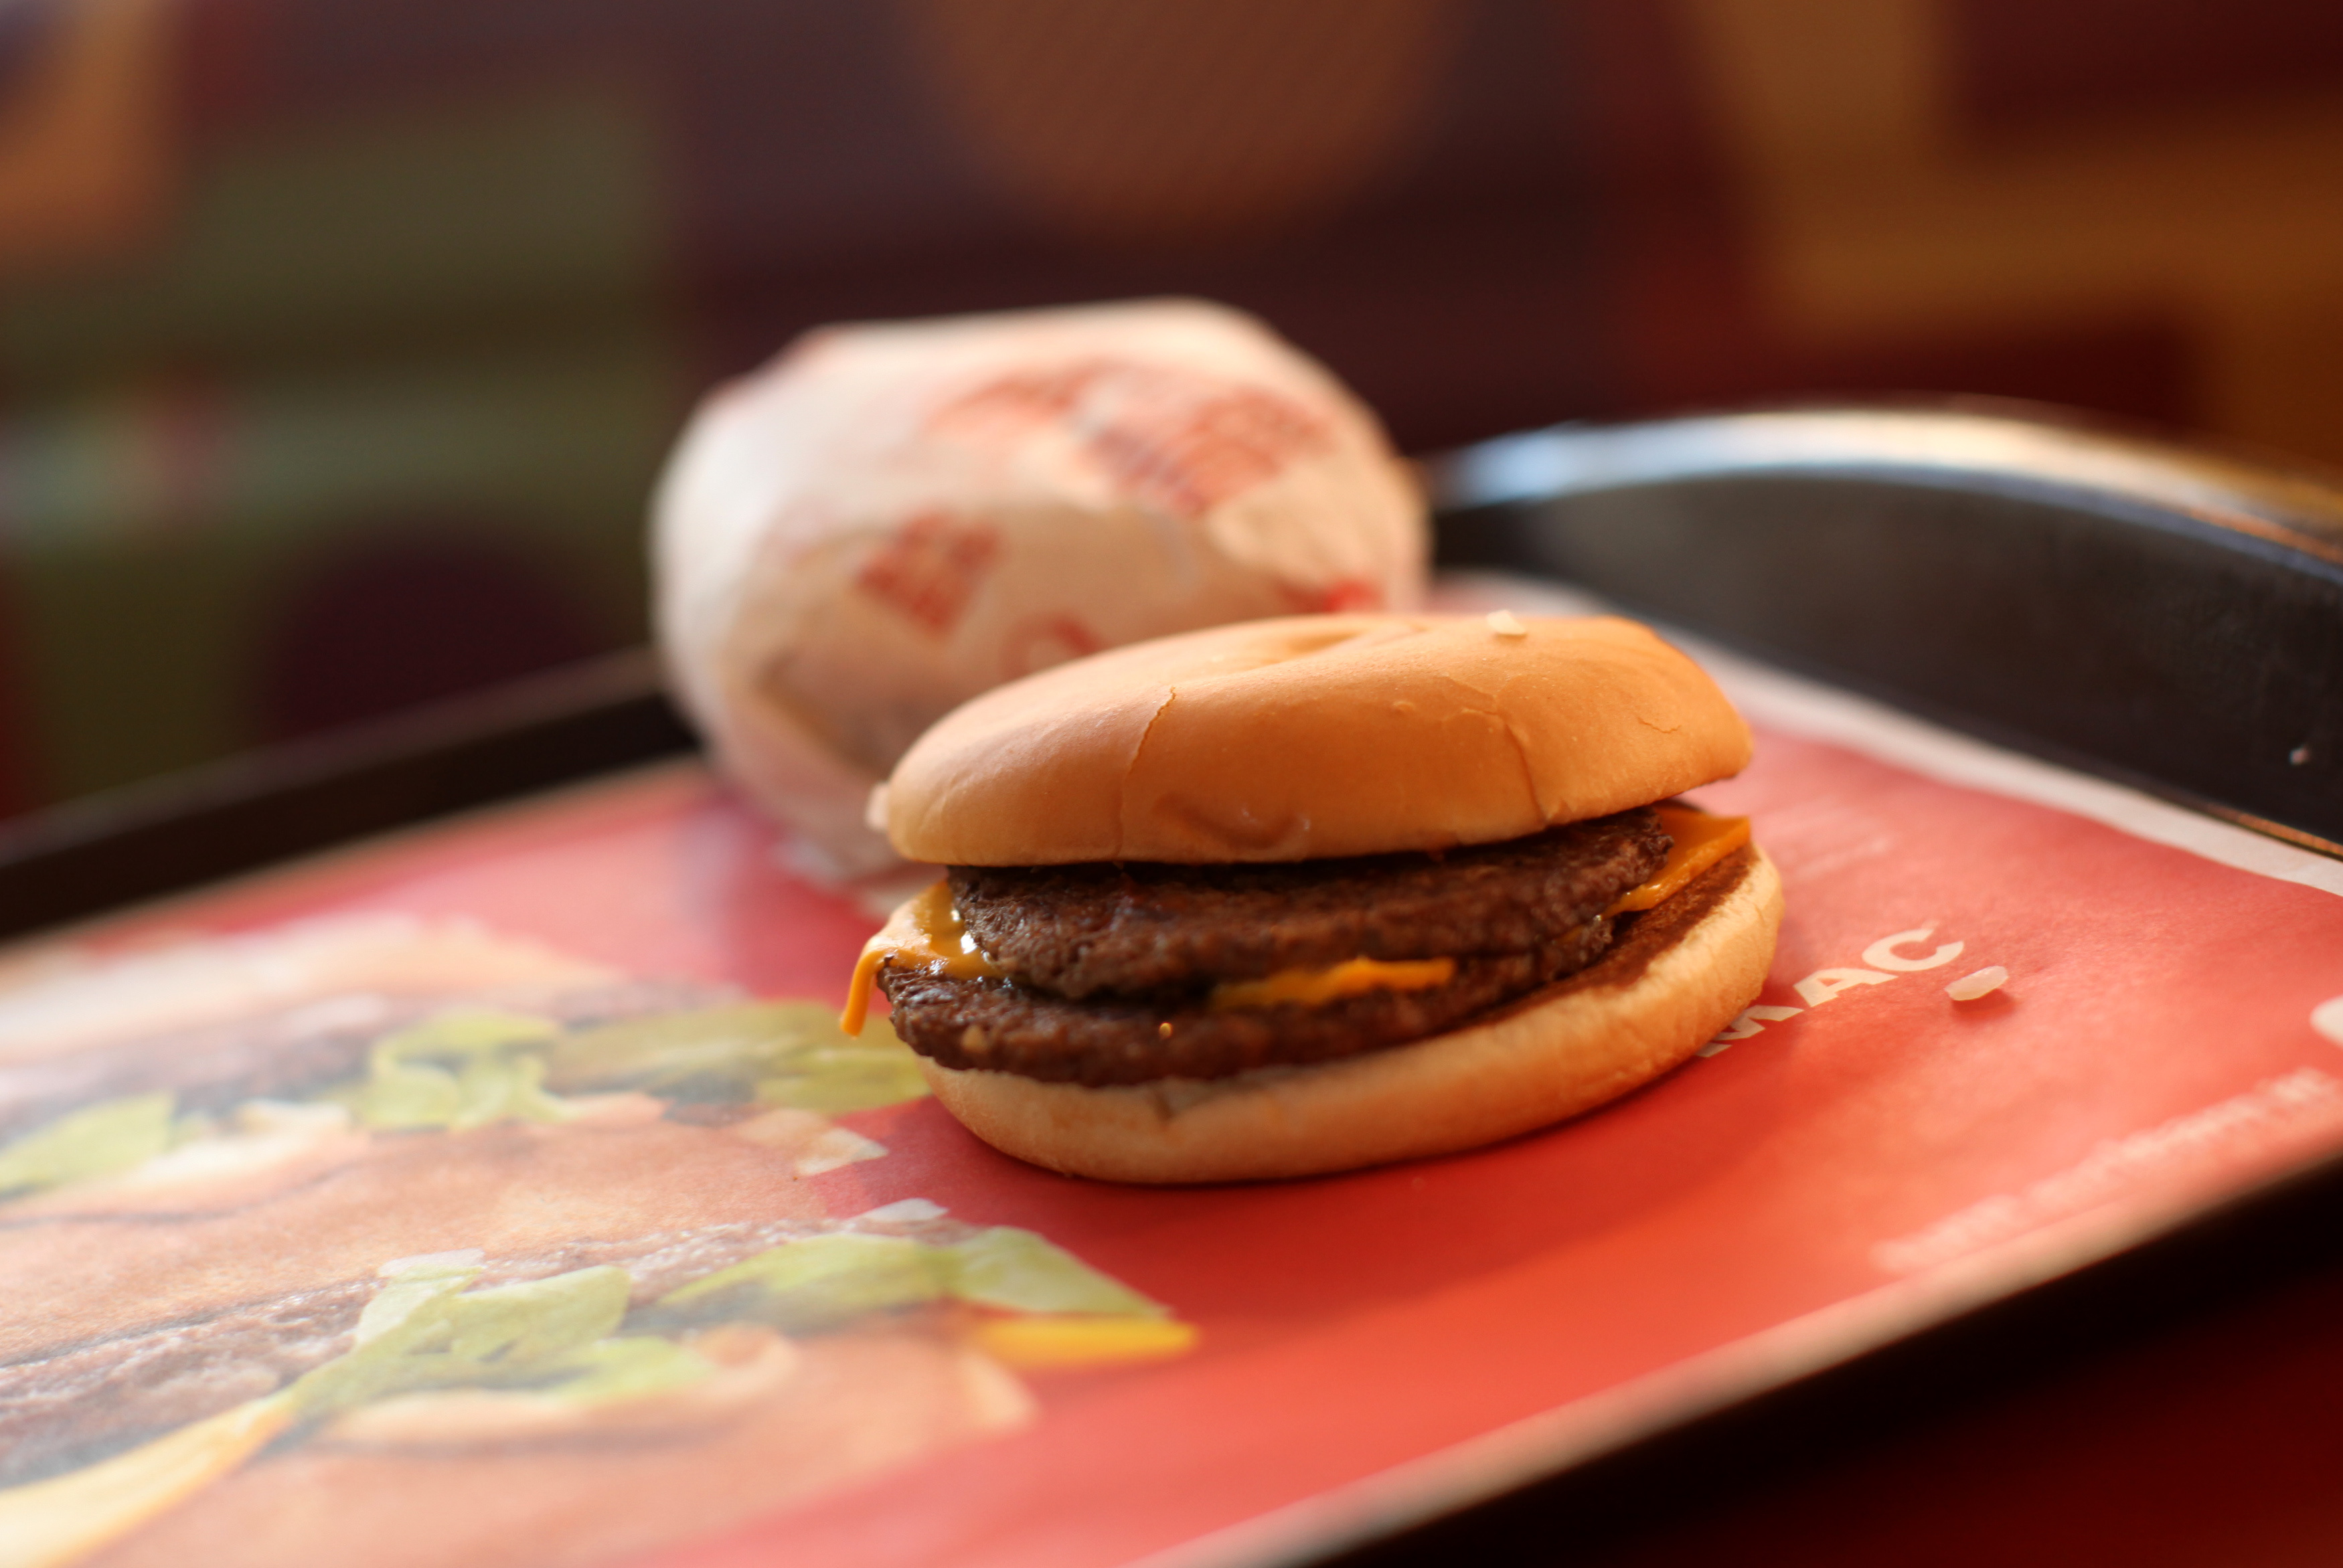 A McDouble burger is pictured at a McDonald's restaurant in the Fillmore District of San Francisco